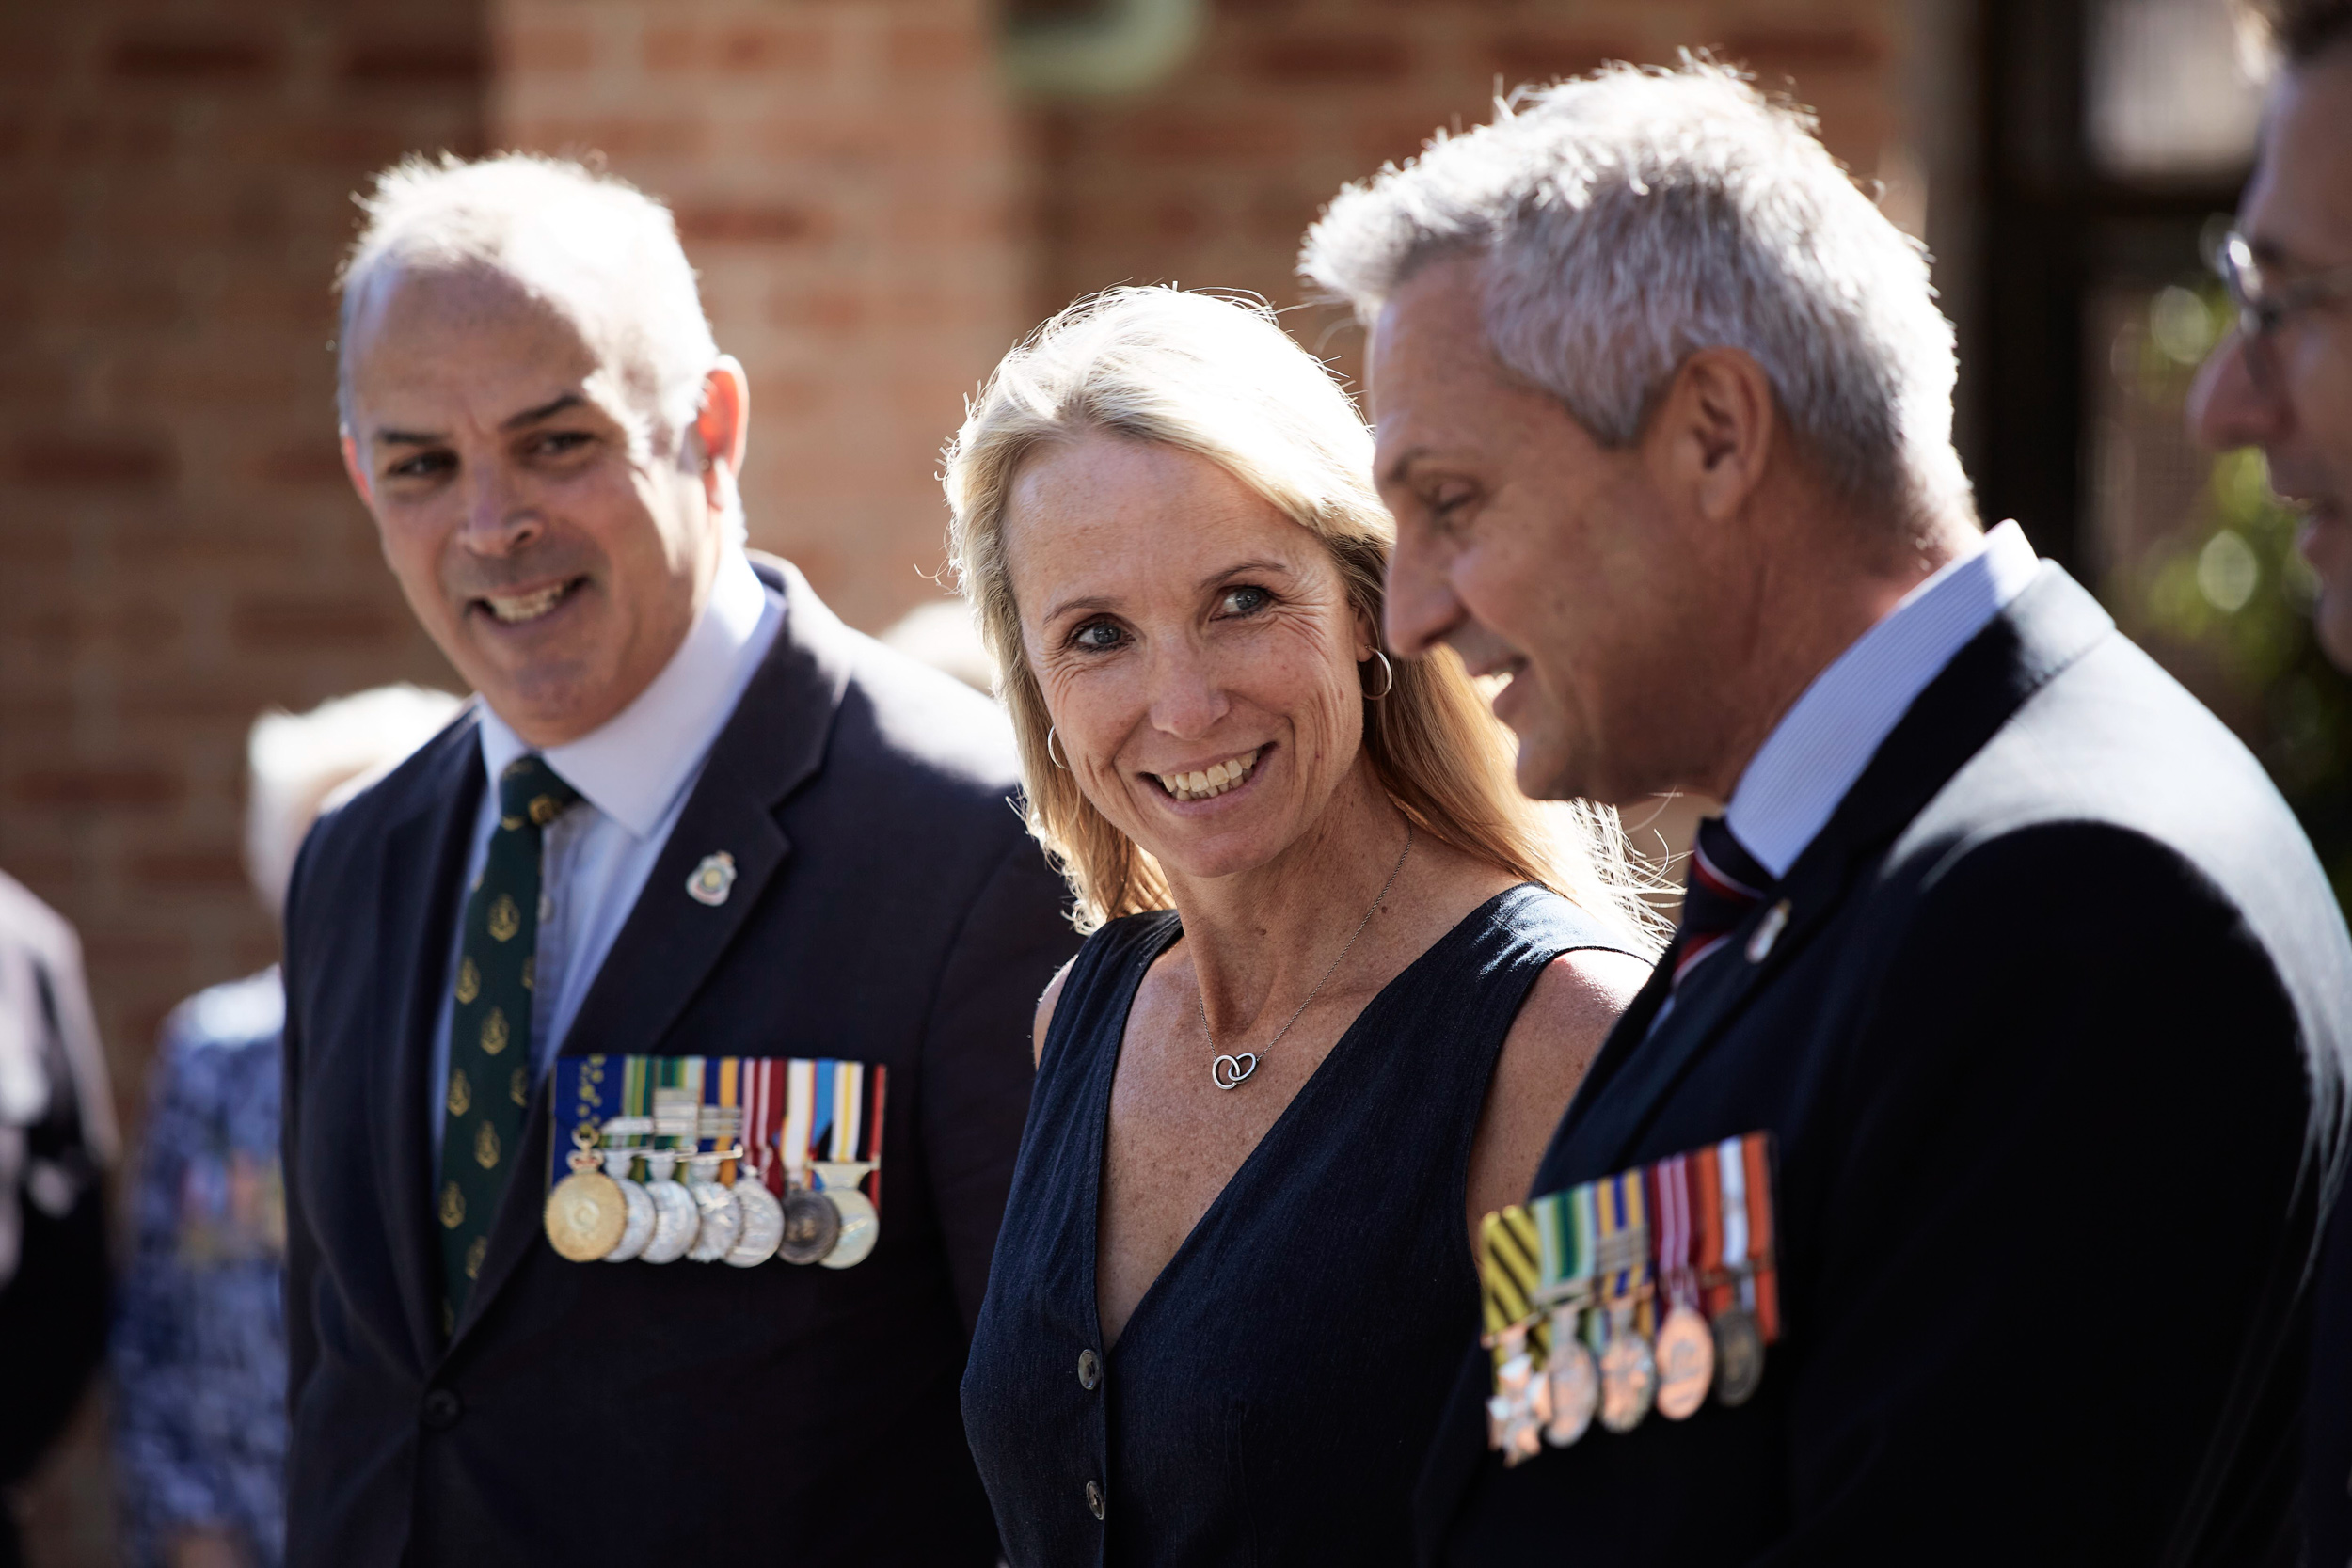 RSLL_MSL_Web_107 | RSL LifeCare - provide care and service to war veterans, retirement villages and accommodation, aged care services and assisted living